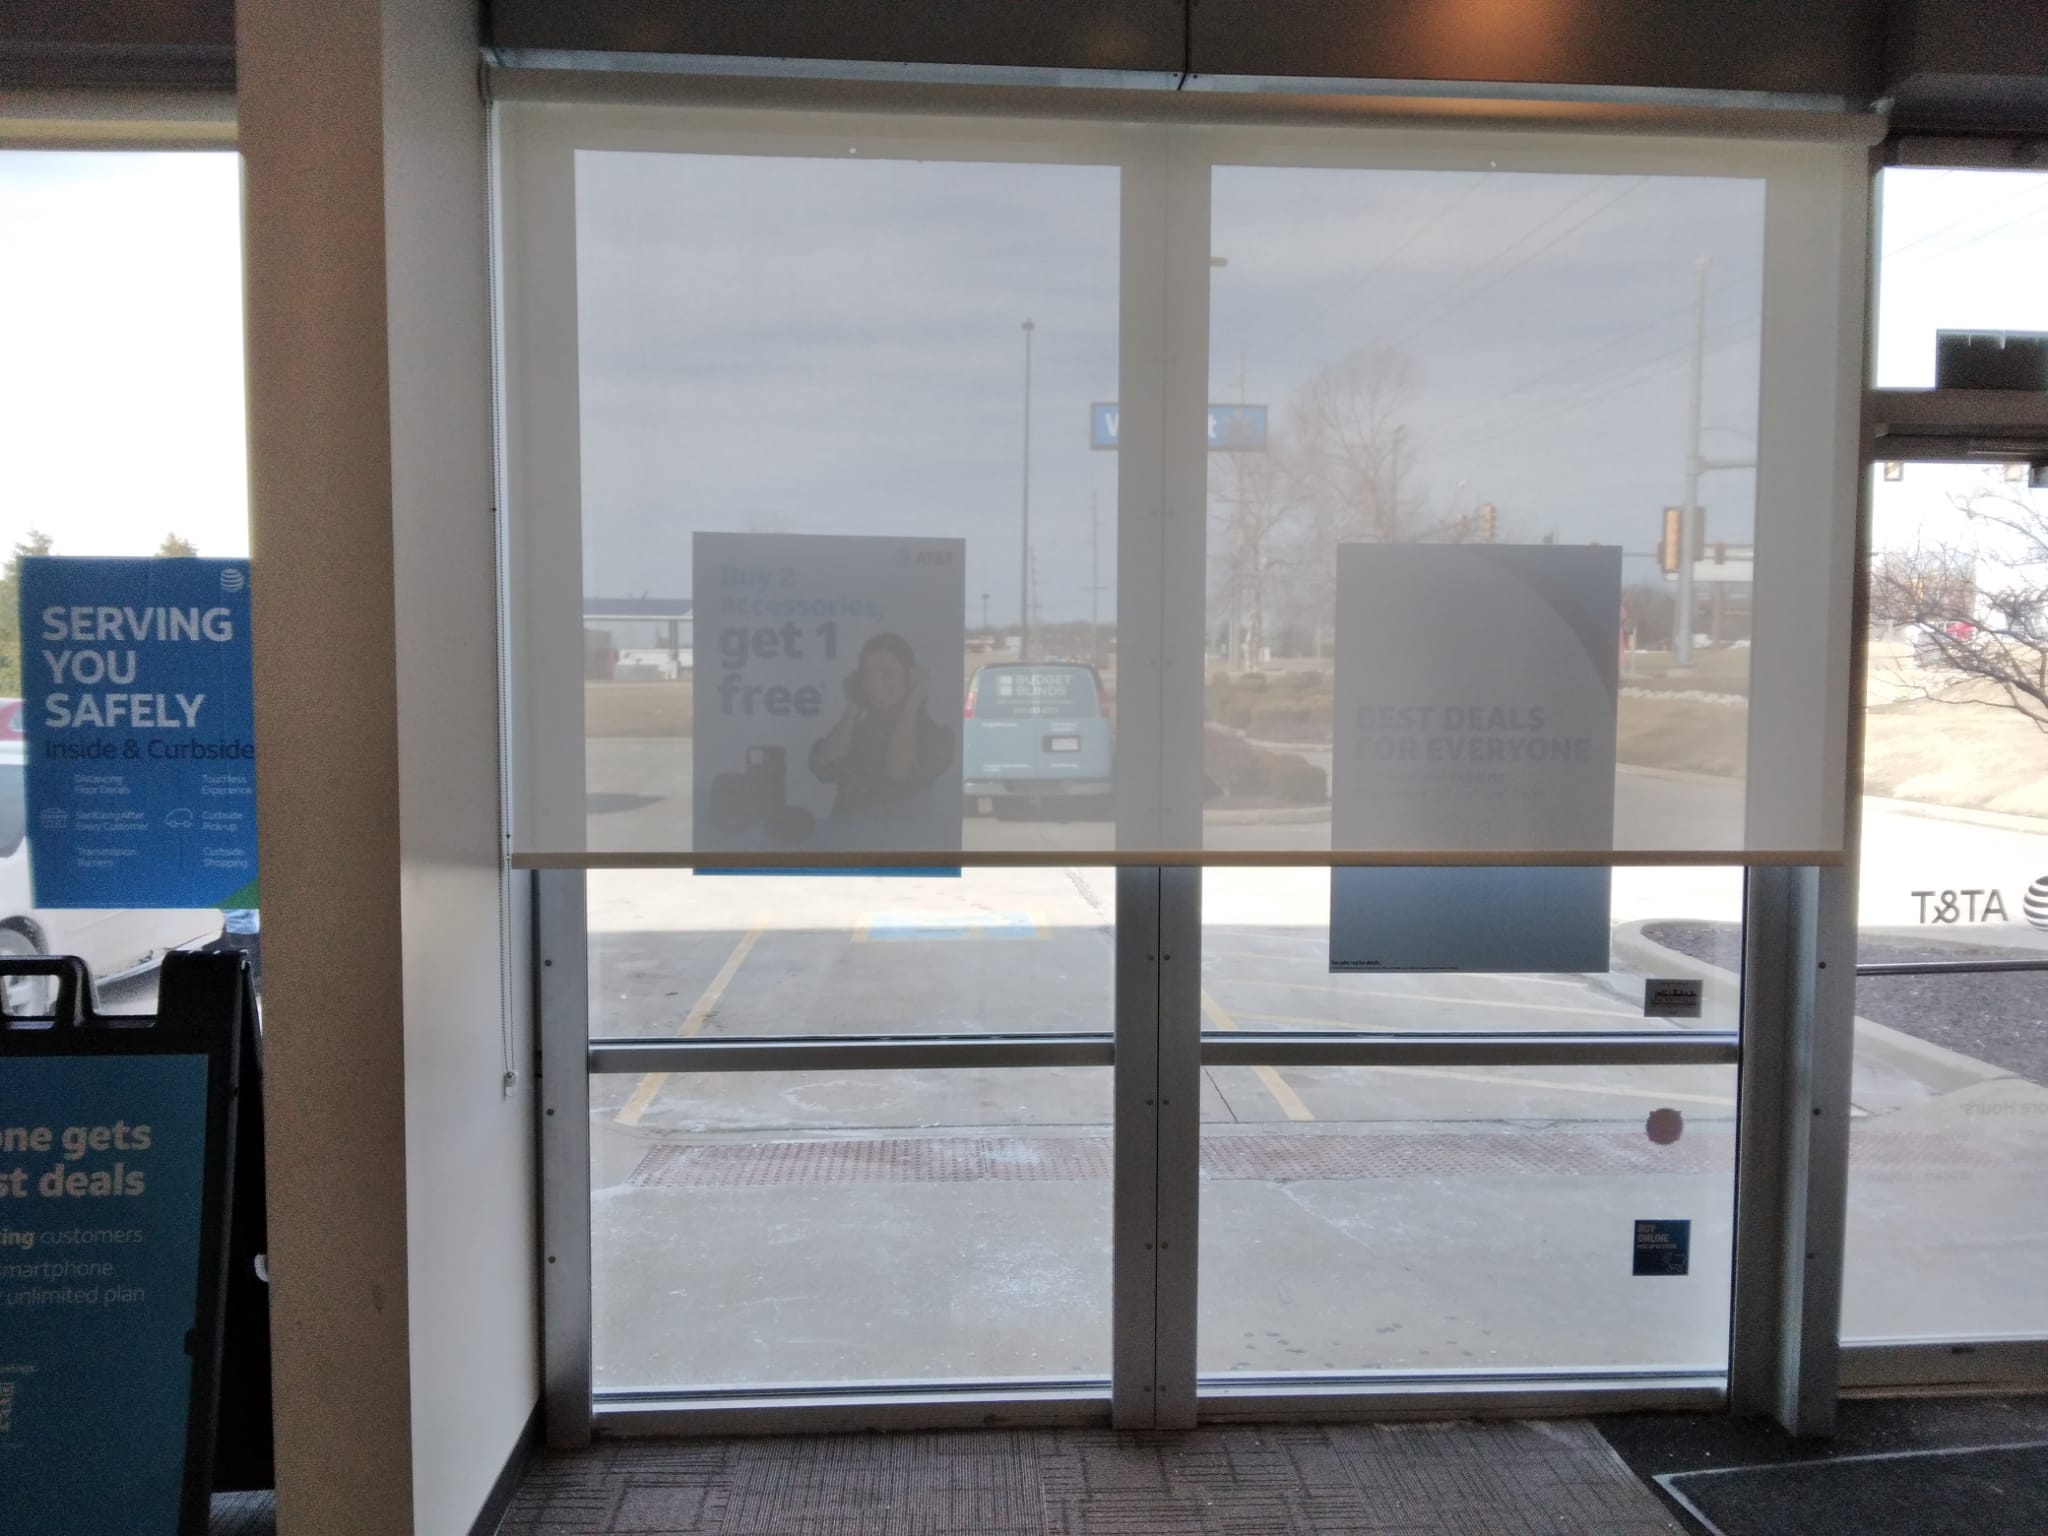 Roller shades are one of the best window covering options for commercial applications. They look great in this store front in Jacksonville, Illinois.  BudgetBlinds  WindowCoverings  Shades  RollerShades  SpringfieldIllinois  Springfield